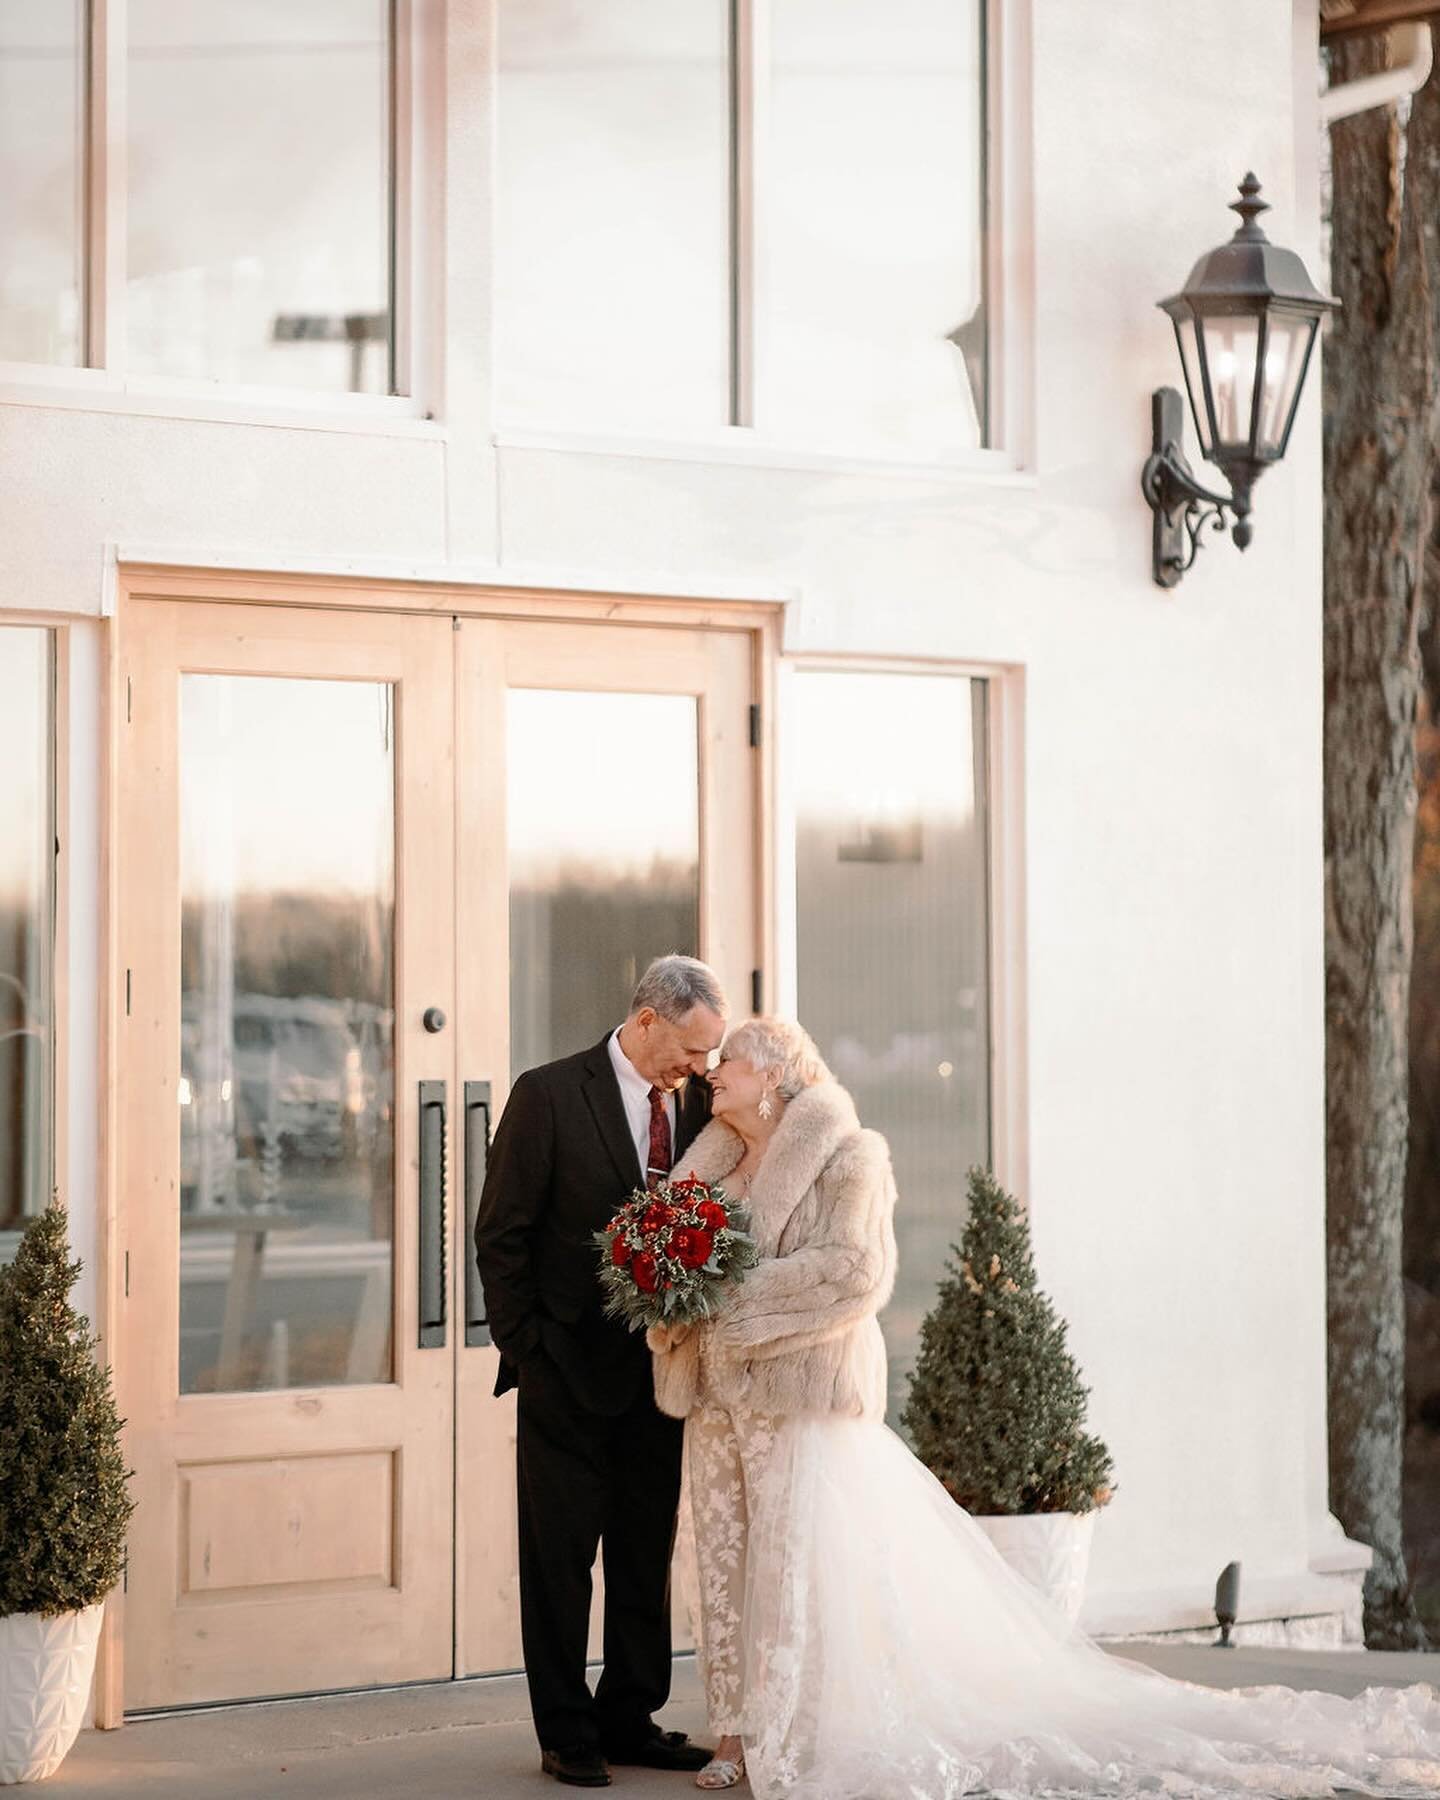 Vicki &amp; Warren brought soooo much love and kindness into this place ❤️ I don&rsquo;t think there was a dry eye in their ceremony, because you could tangibly feel the love they had for another. I, Katelyn, had the privilege of coordinating their d